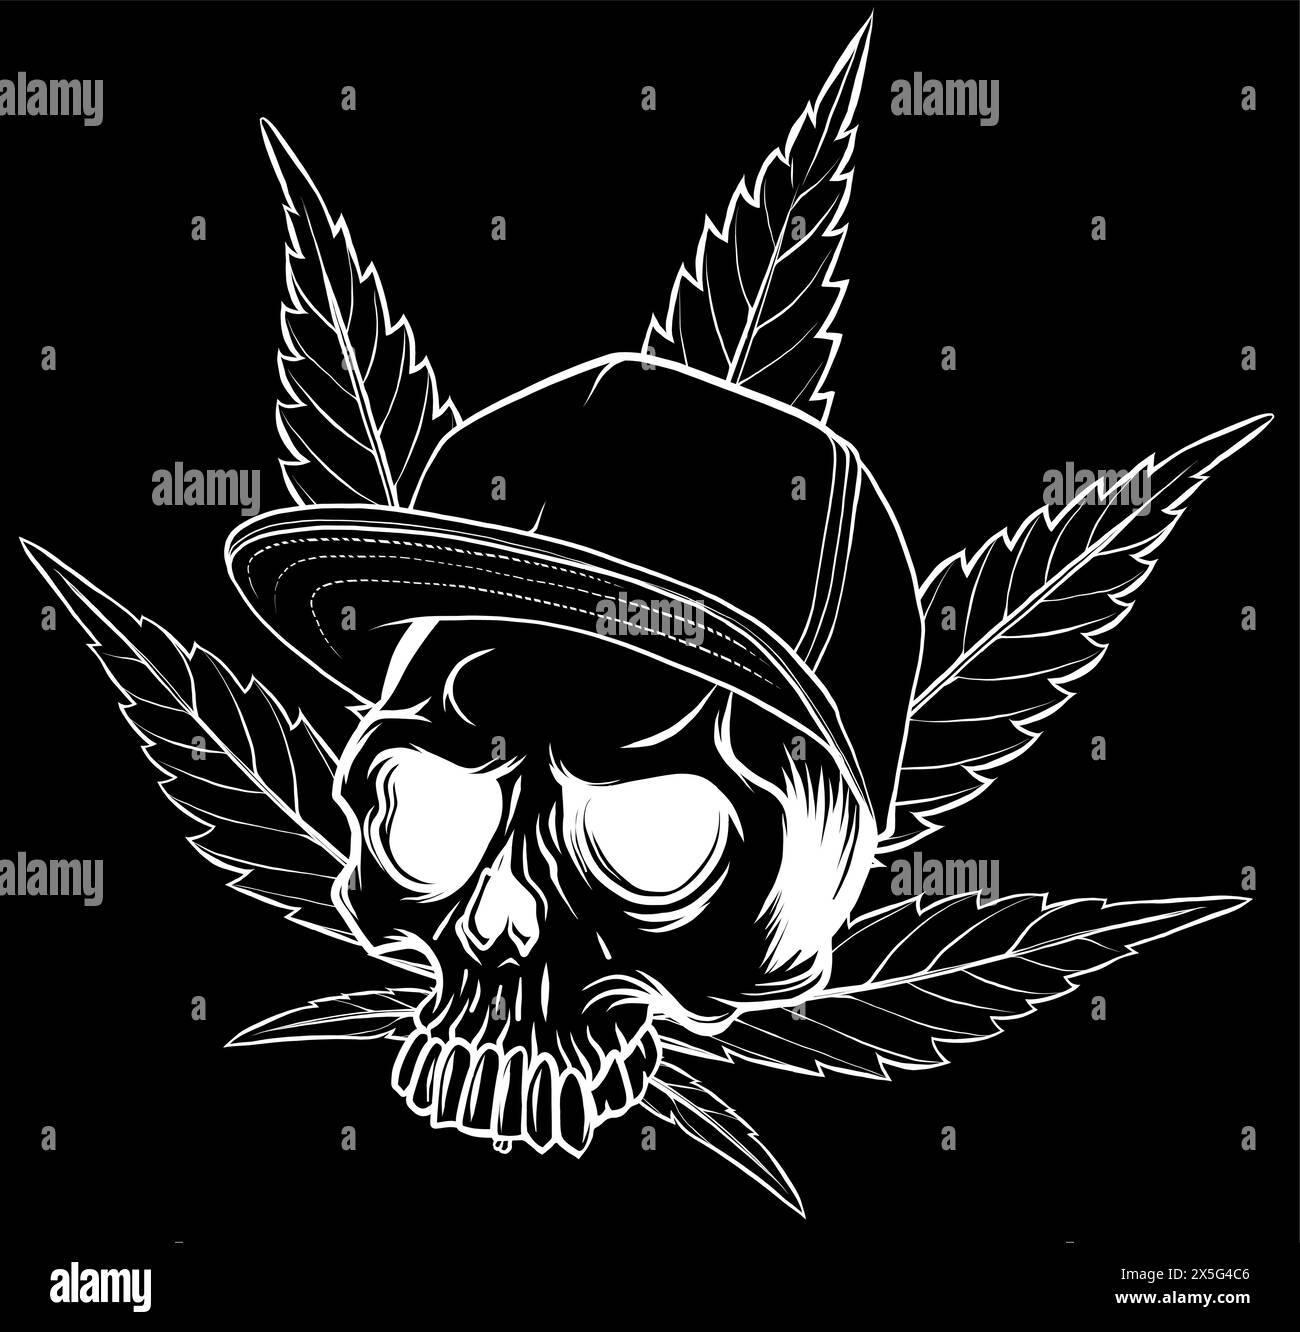 white silhouette of head skull with leaves marijuana and hat vector illustration design Stock Vector